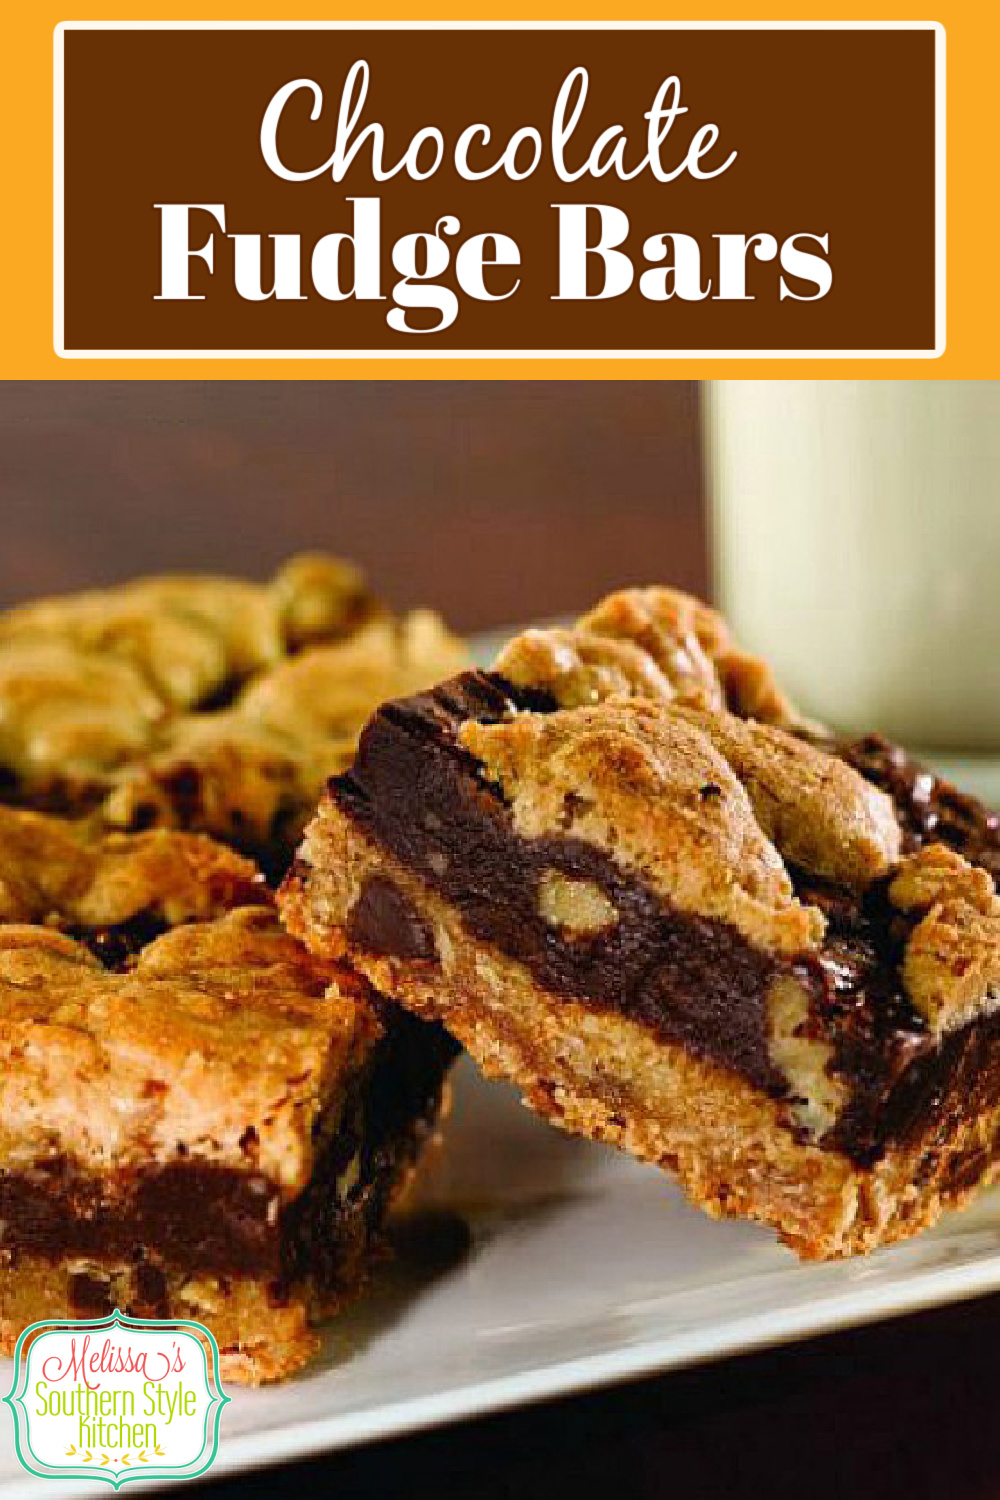 Treat yourself to these Chocolate Fudge Bars for a handheld chocolate lovers dessert #chocolatebars #chocolatefudgebars #cookiebars #barrecipes #chocolate #holidaybaking #holidayrecipes #dessert #dessertfoodrecipes #southernfood #southernrecipes